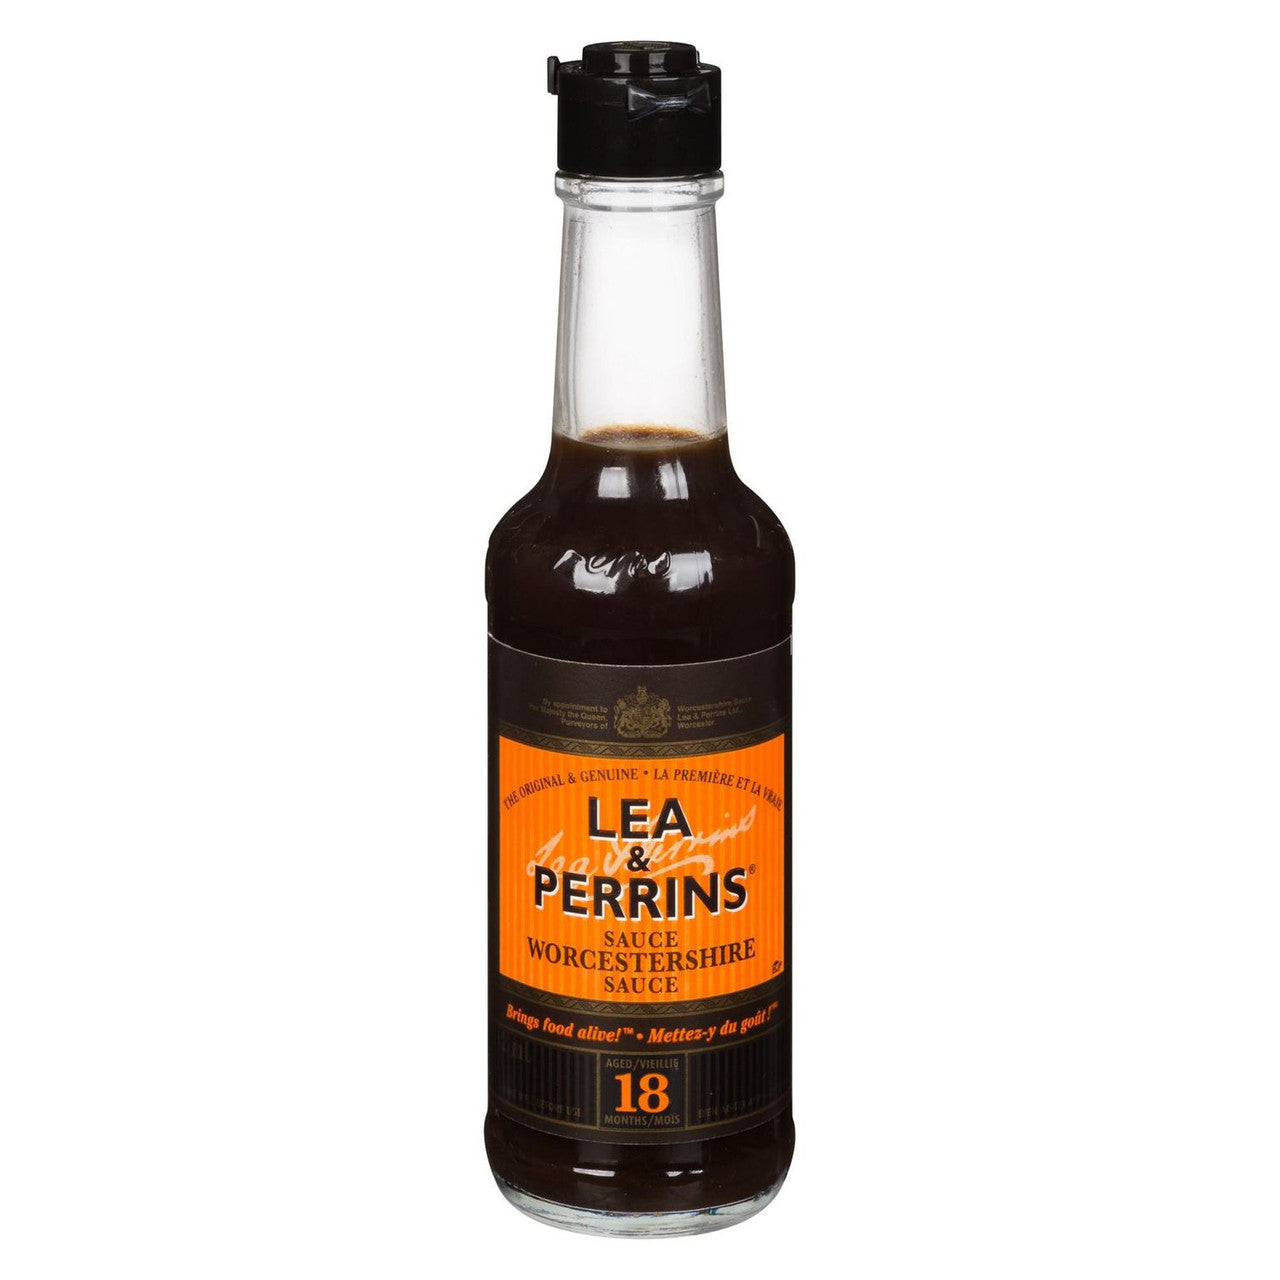 Lea & Perrins Worcestershire Sauce, 142mL/5 fl. oz., Bottle {Imported from Canada}